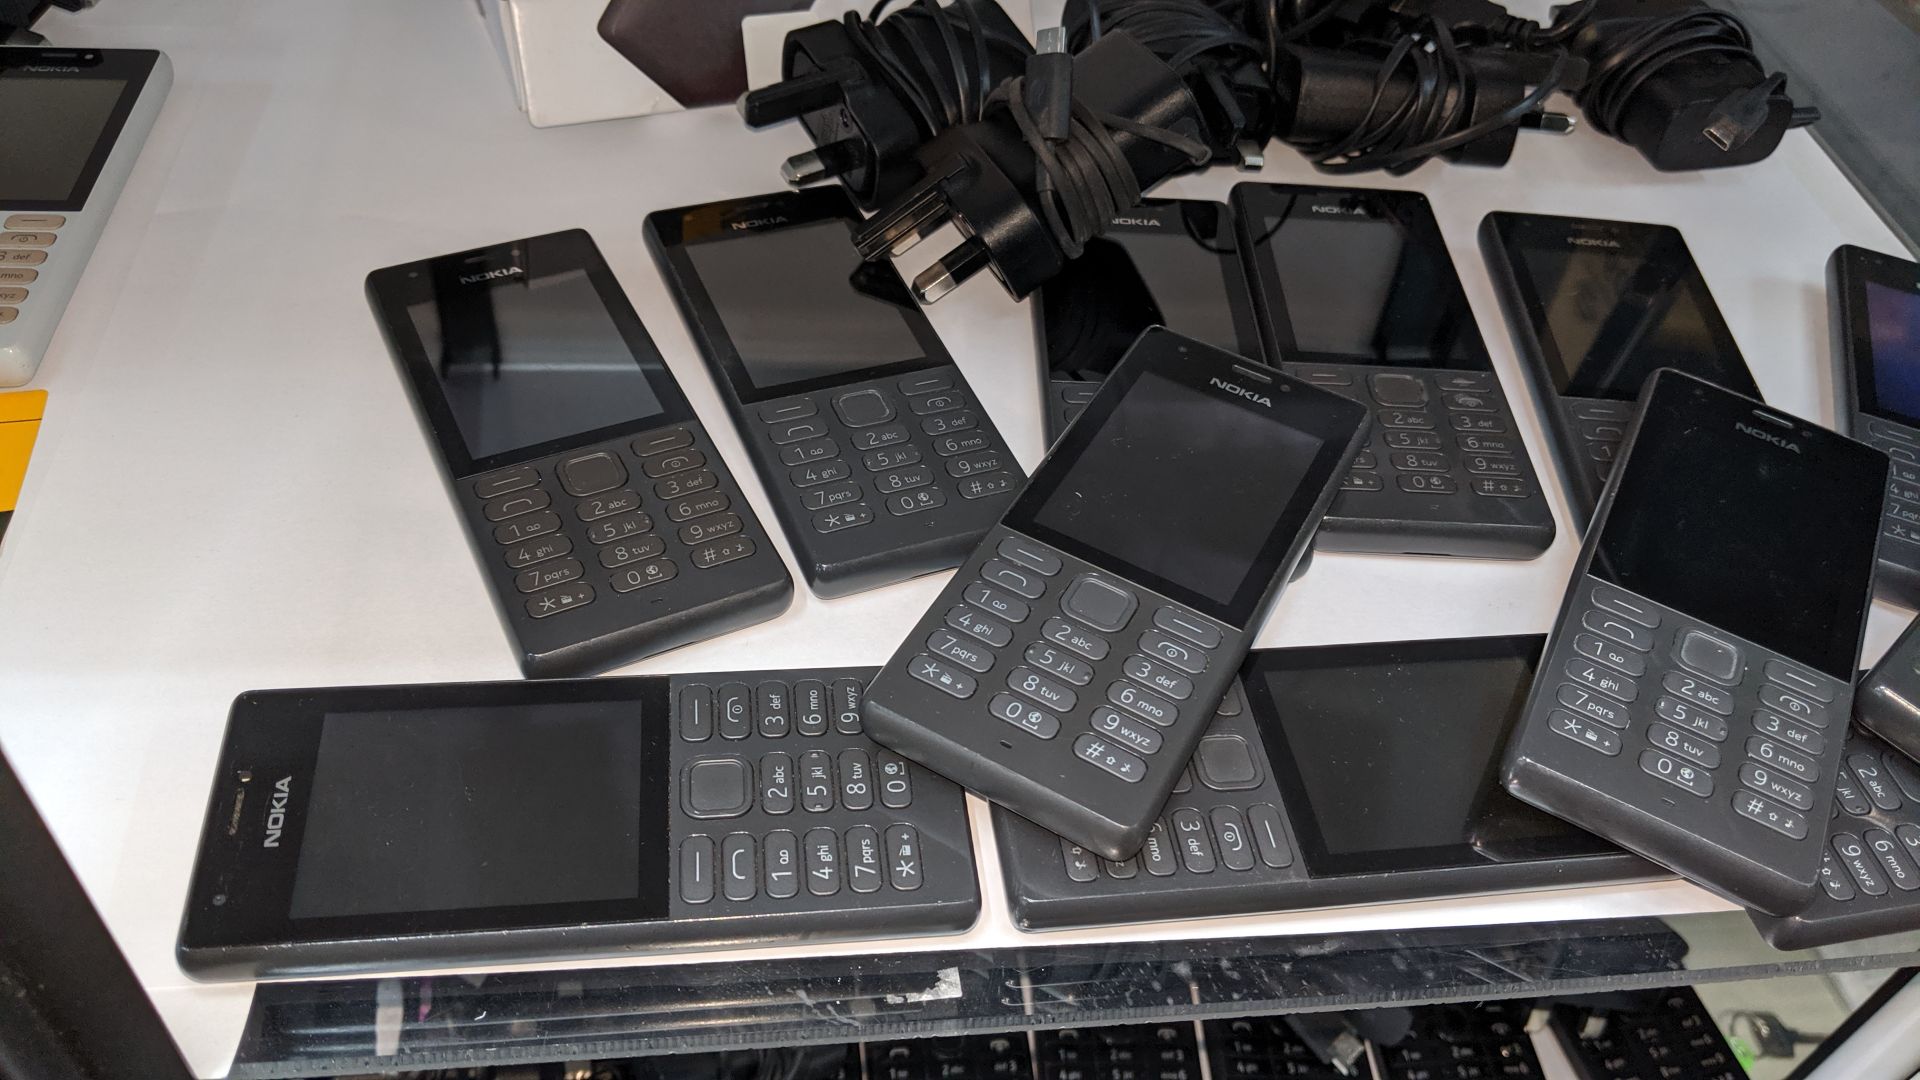 12 off Nokia 216 black mobile phones including 7 chargers & 2 boxes. We believe these phones were - Image 3 of 6